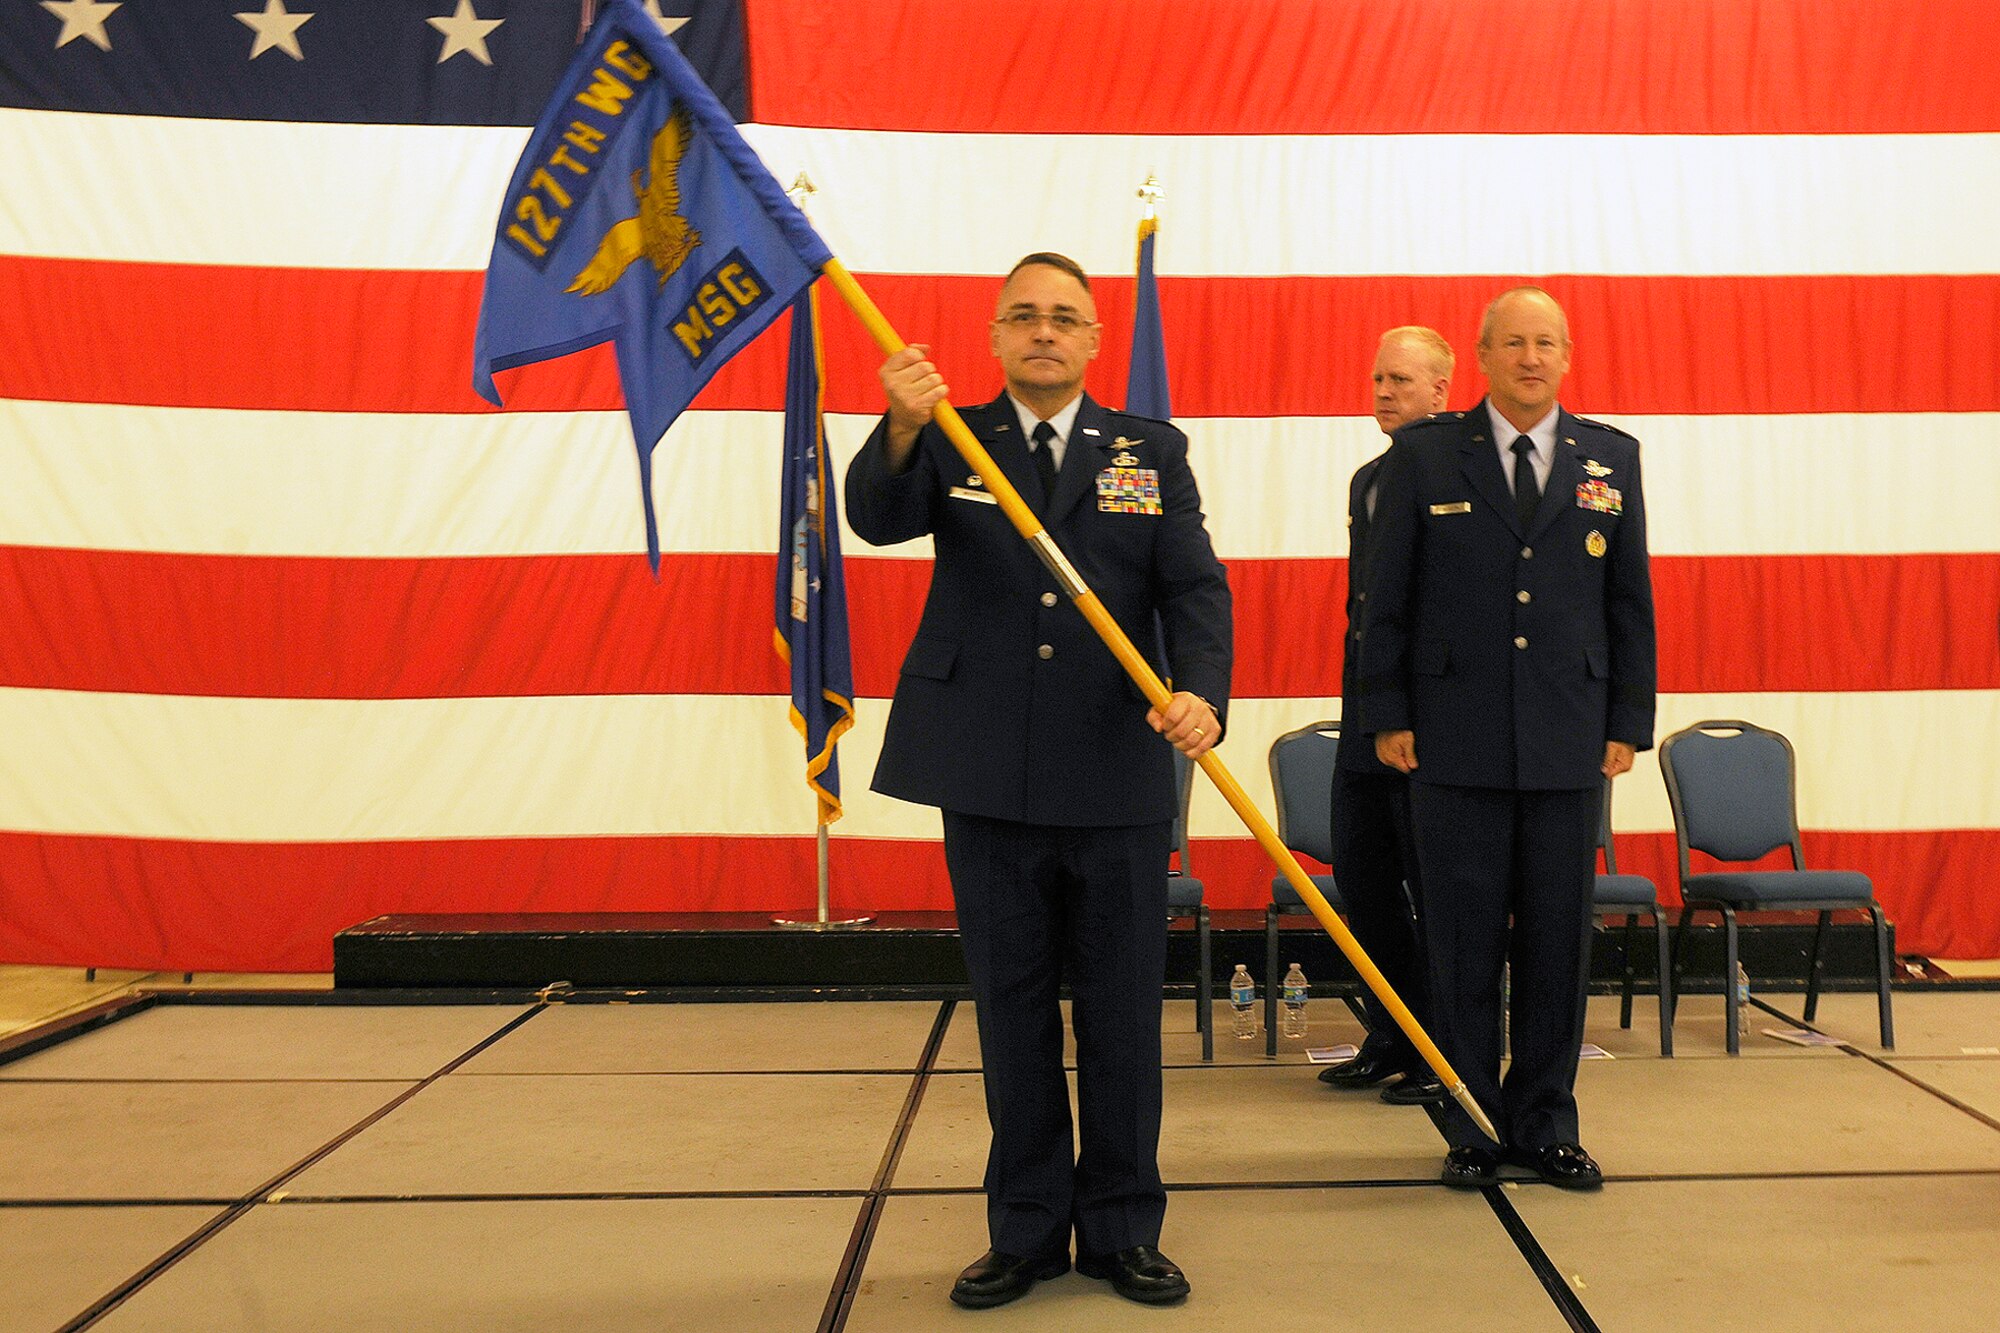 150614-Z-EZ686-011 -- Col. Daniel J. Whipple holds the guideon as he assumes command of the 127th Mission Support Group after a change of command ceremony at Selfridge Air National Guard Base, June 13, 2015. Whipple’s most recent assignment before assuming command of the 127th MSG was serving with the 217th Air Communications Squadron. (U.S. Air National Guard photo by MSgt. David Kujawa/released)